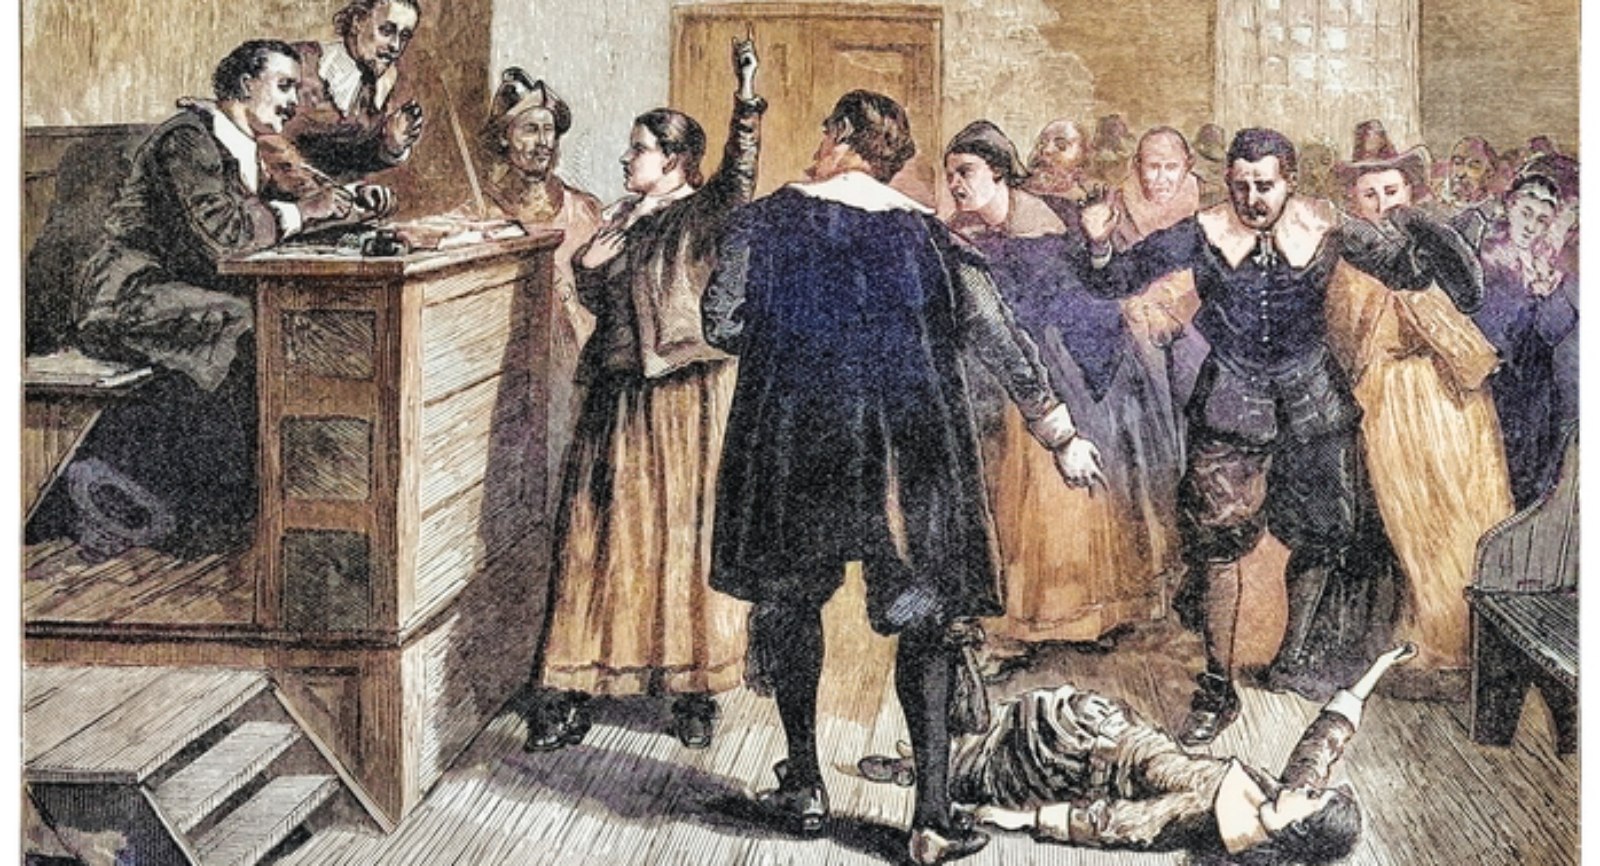 In Massachusetts, activists demand the rehabilitation of women who were tried for “witchcraft” 300 years ago